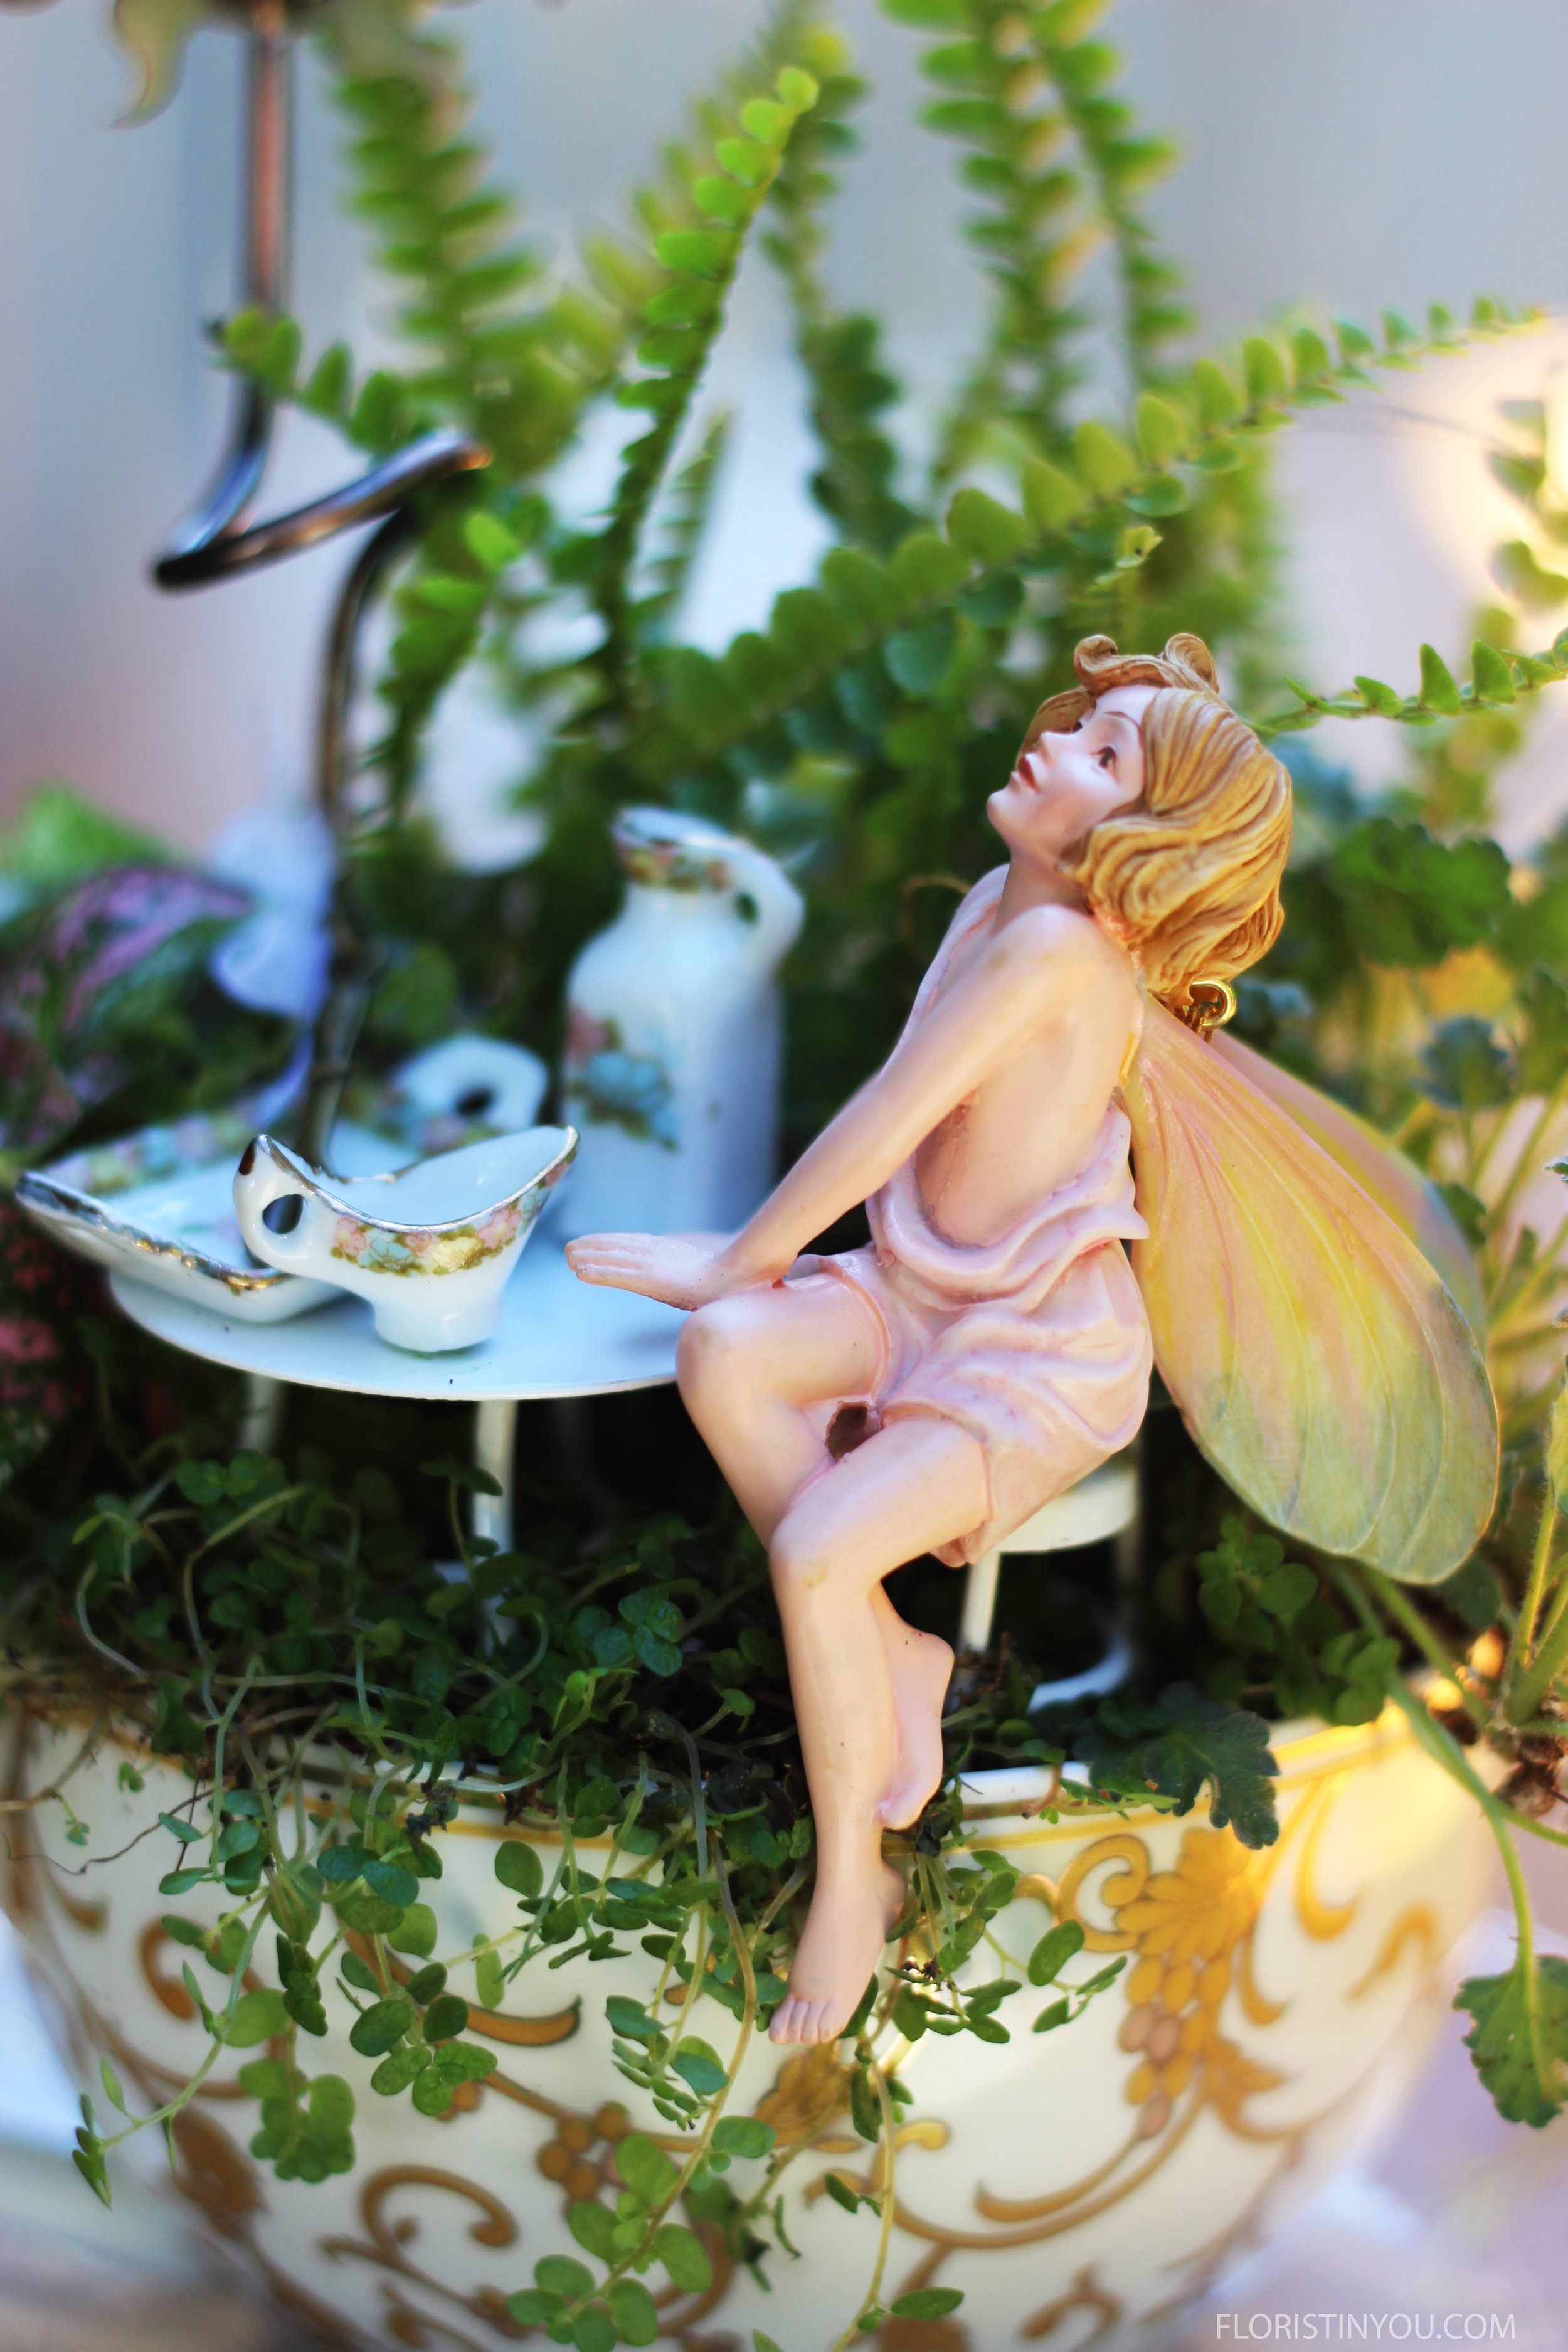 How the iphone Killed the Flower Fairies